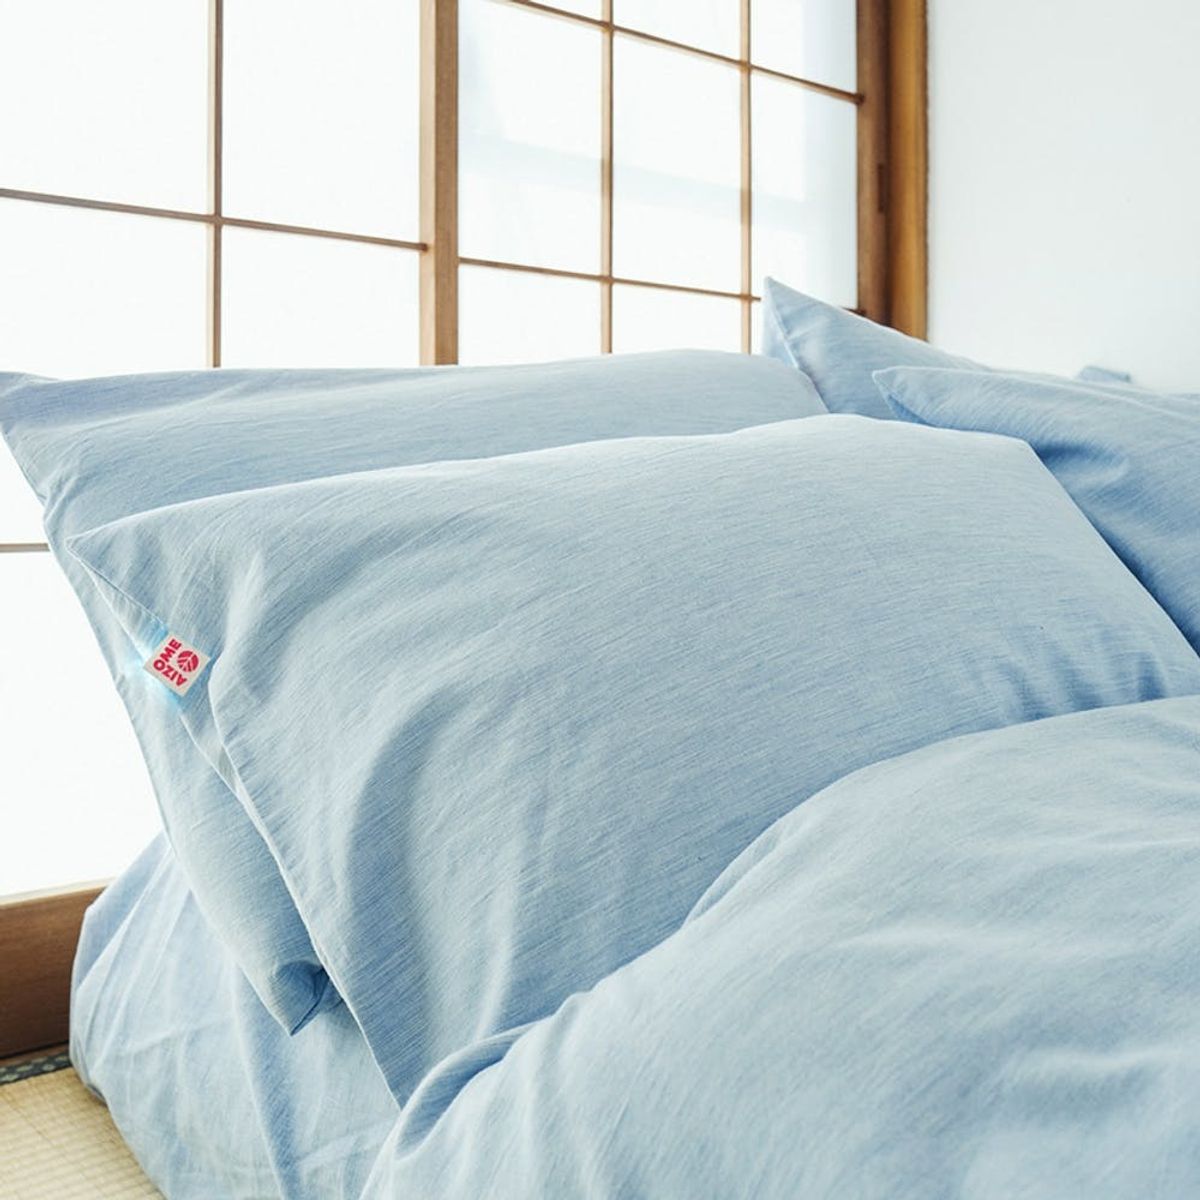 These Indigo-Dyed Japanese Sheets Might Be the Answer to Your Skin Issues